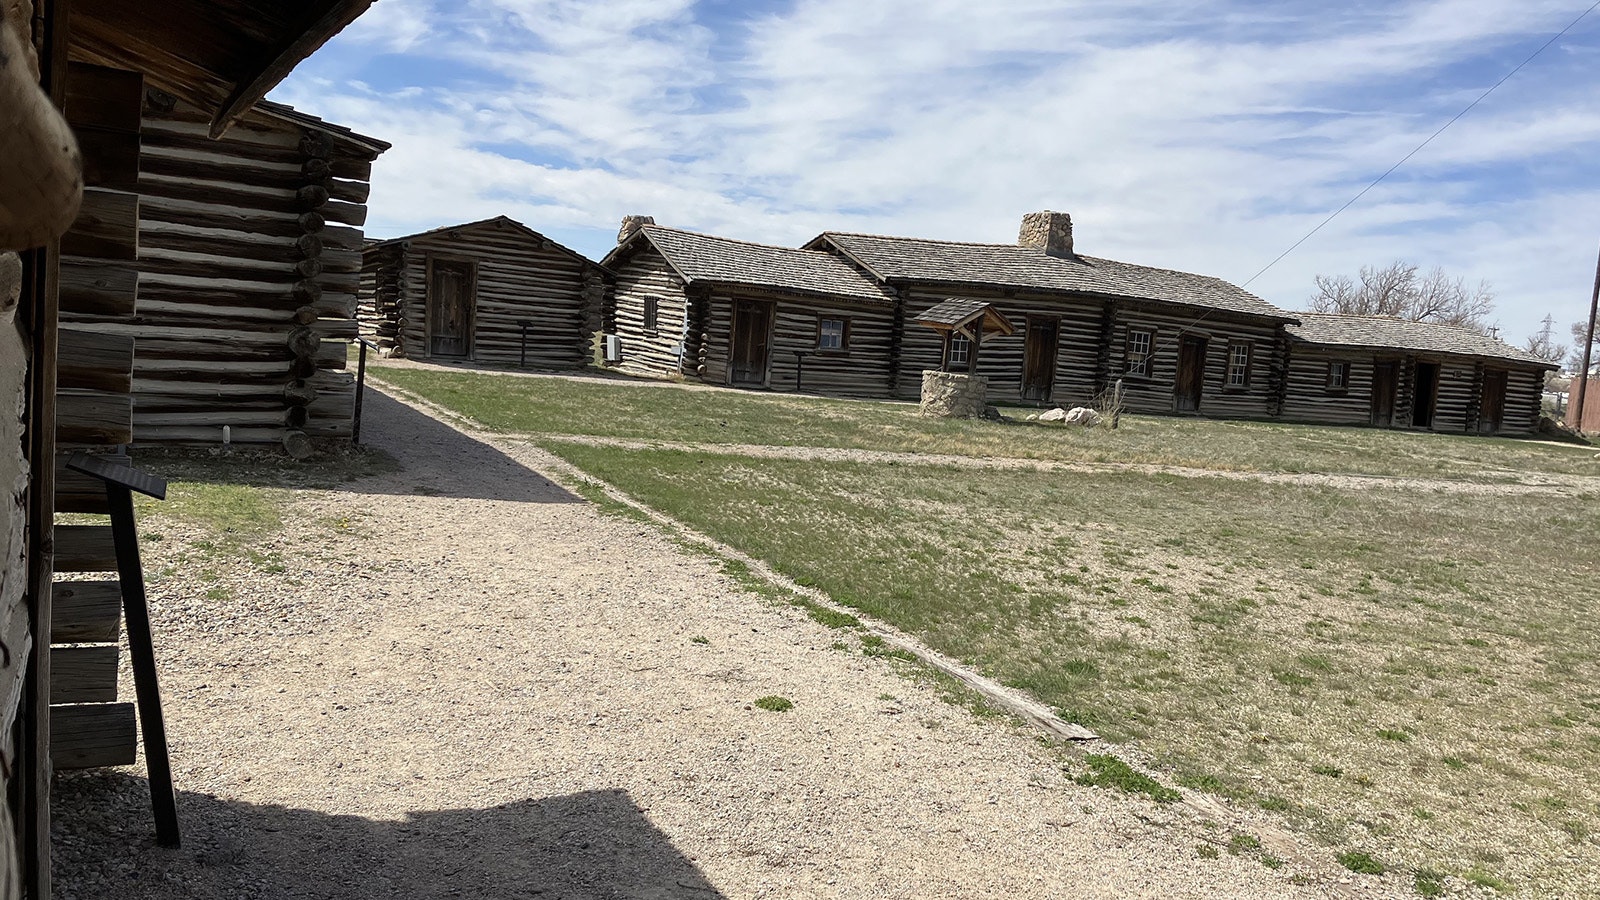 Sounds of hobnailed boots, bare wet footprints that start in the middle of a room, and a building entrance blocked by a chair are some of the stories Fort Caspar Museum staff share about the historic fort and its replica buildings.